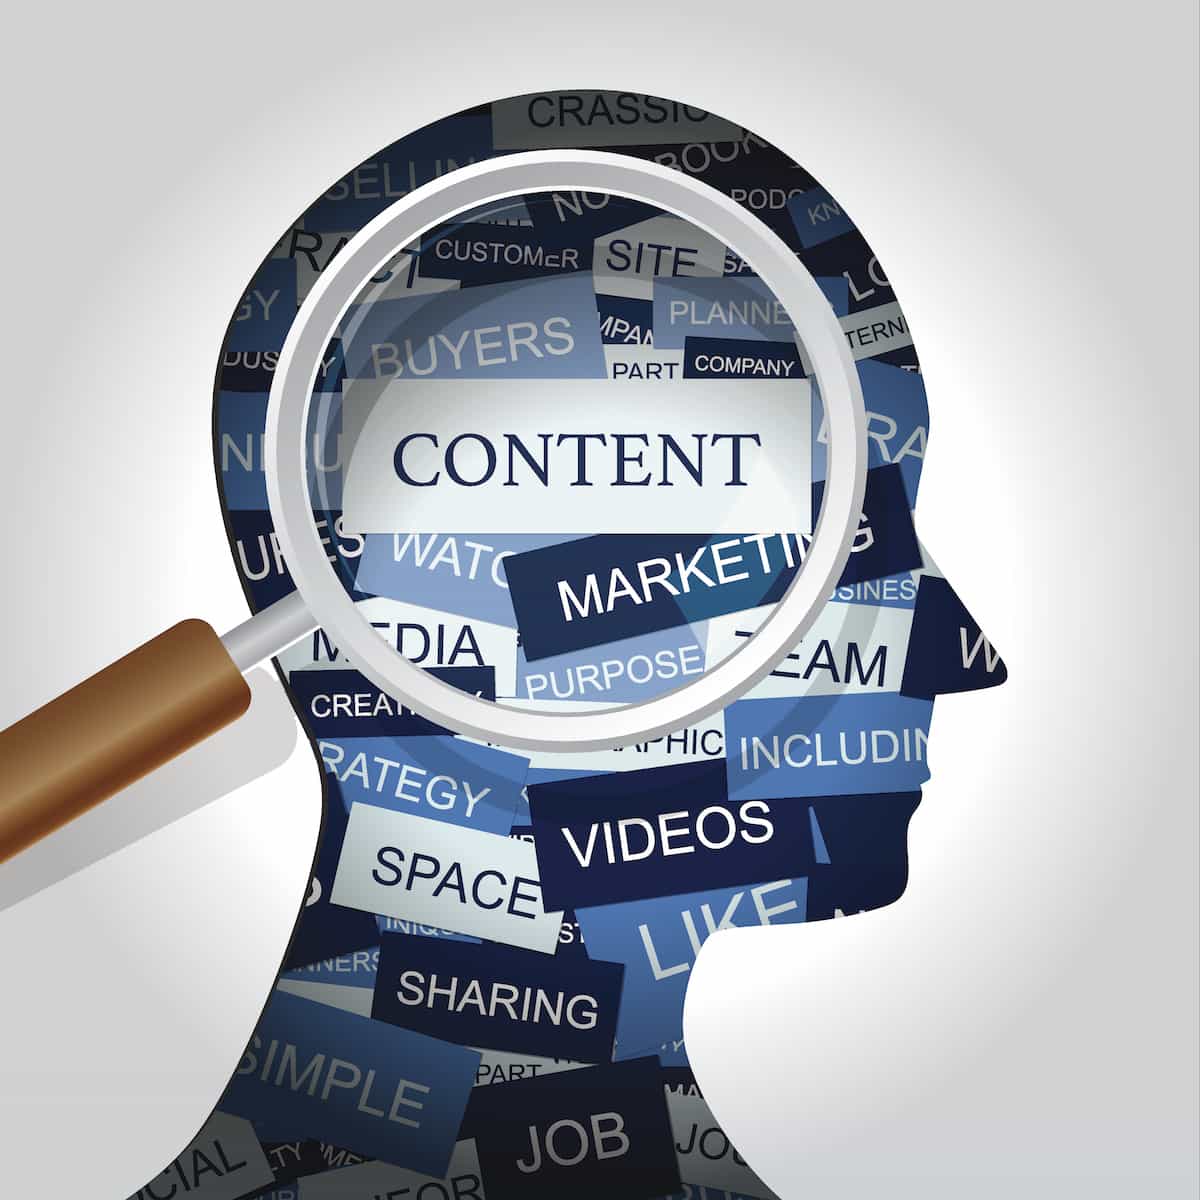 Why Do You Need B2B Content Marketing Strategy?